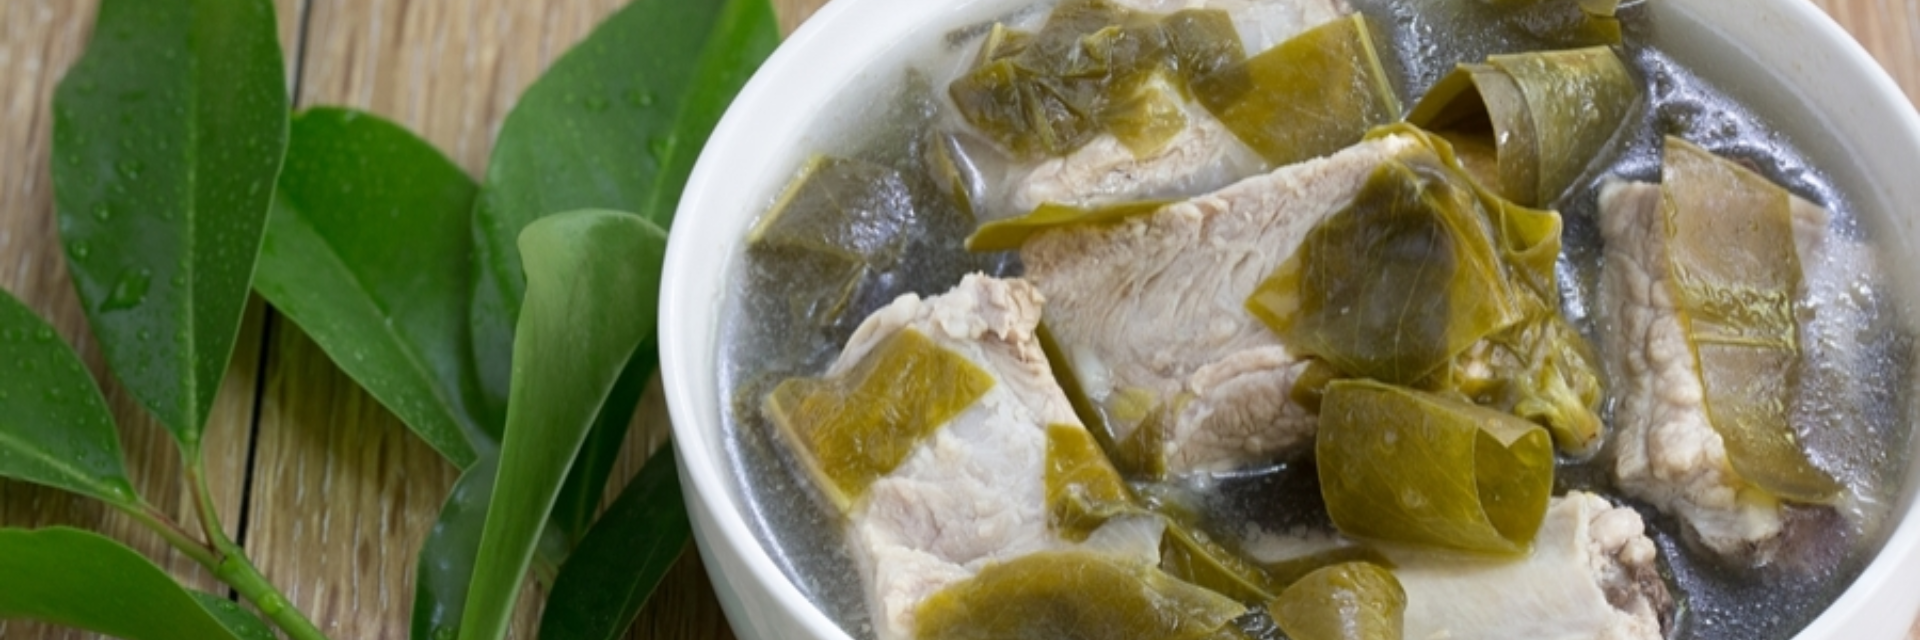 TOM MU CHAMUANG : TRAT’S EXOTIC HERBAL DELICACY